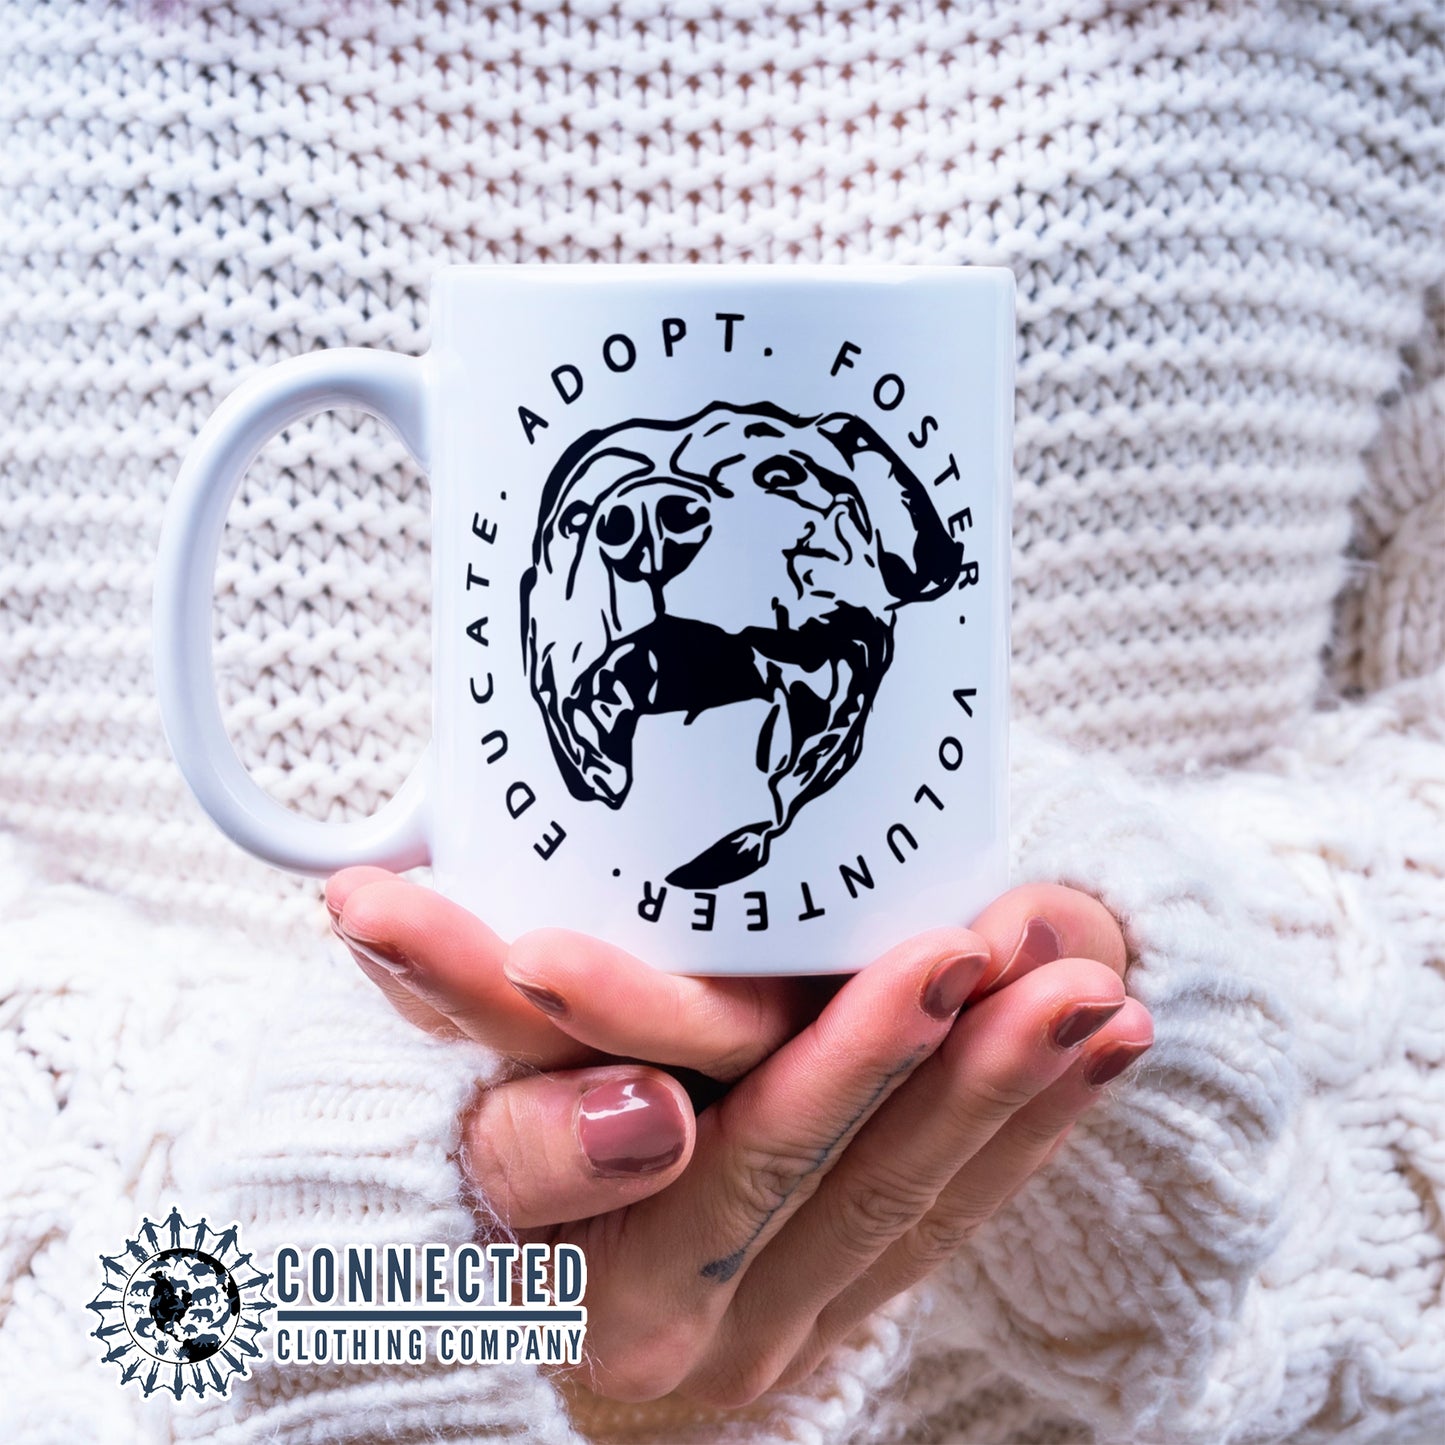 Adopt Educate Foster Volunteer Classic Mug - architectconstructor - Ethically and Sustainably Made - 10% of profits donated to animal rescue organizations